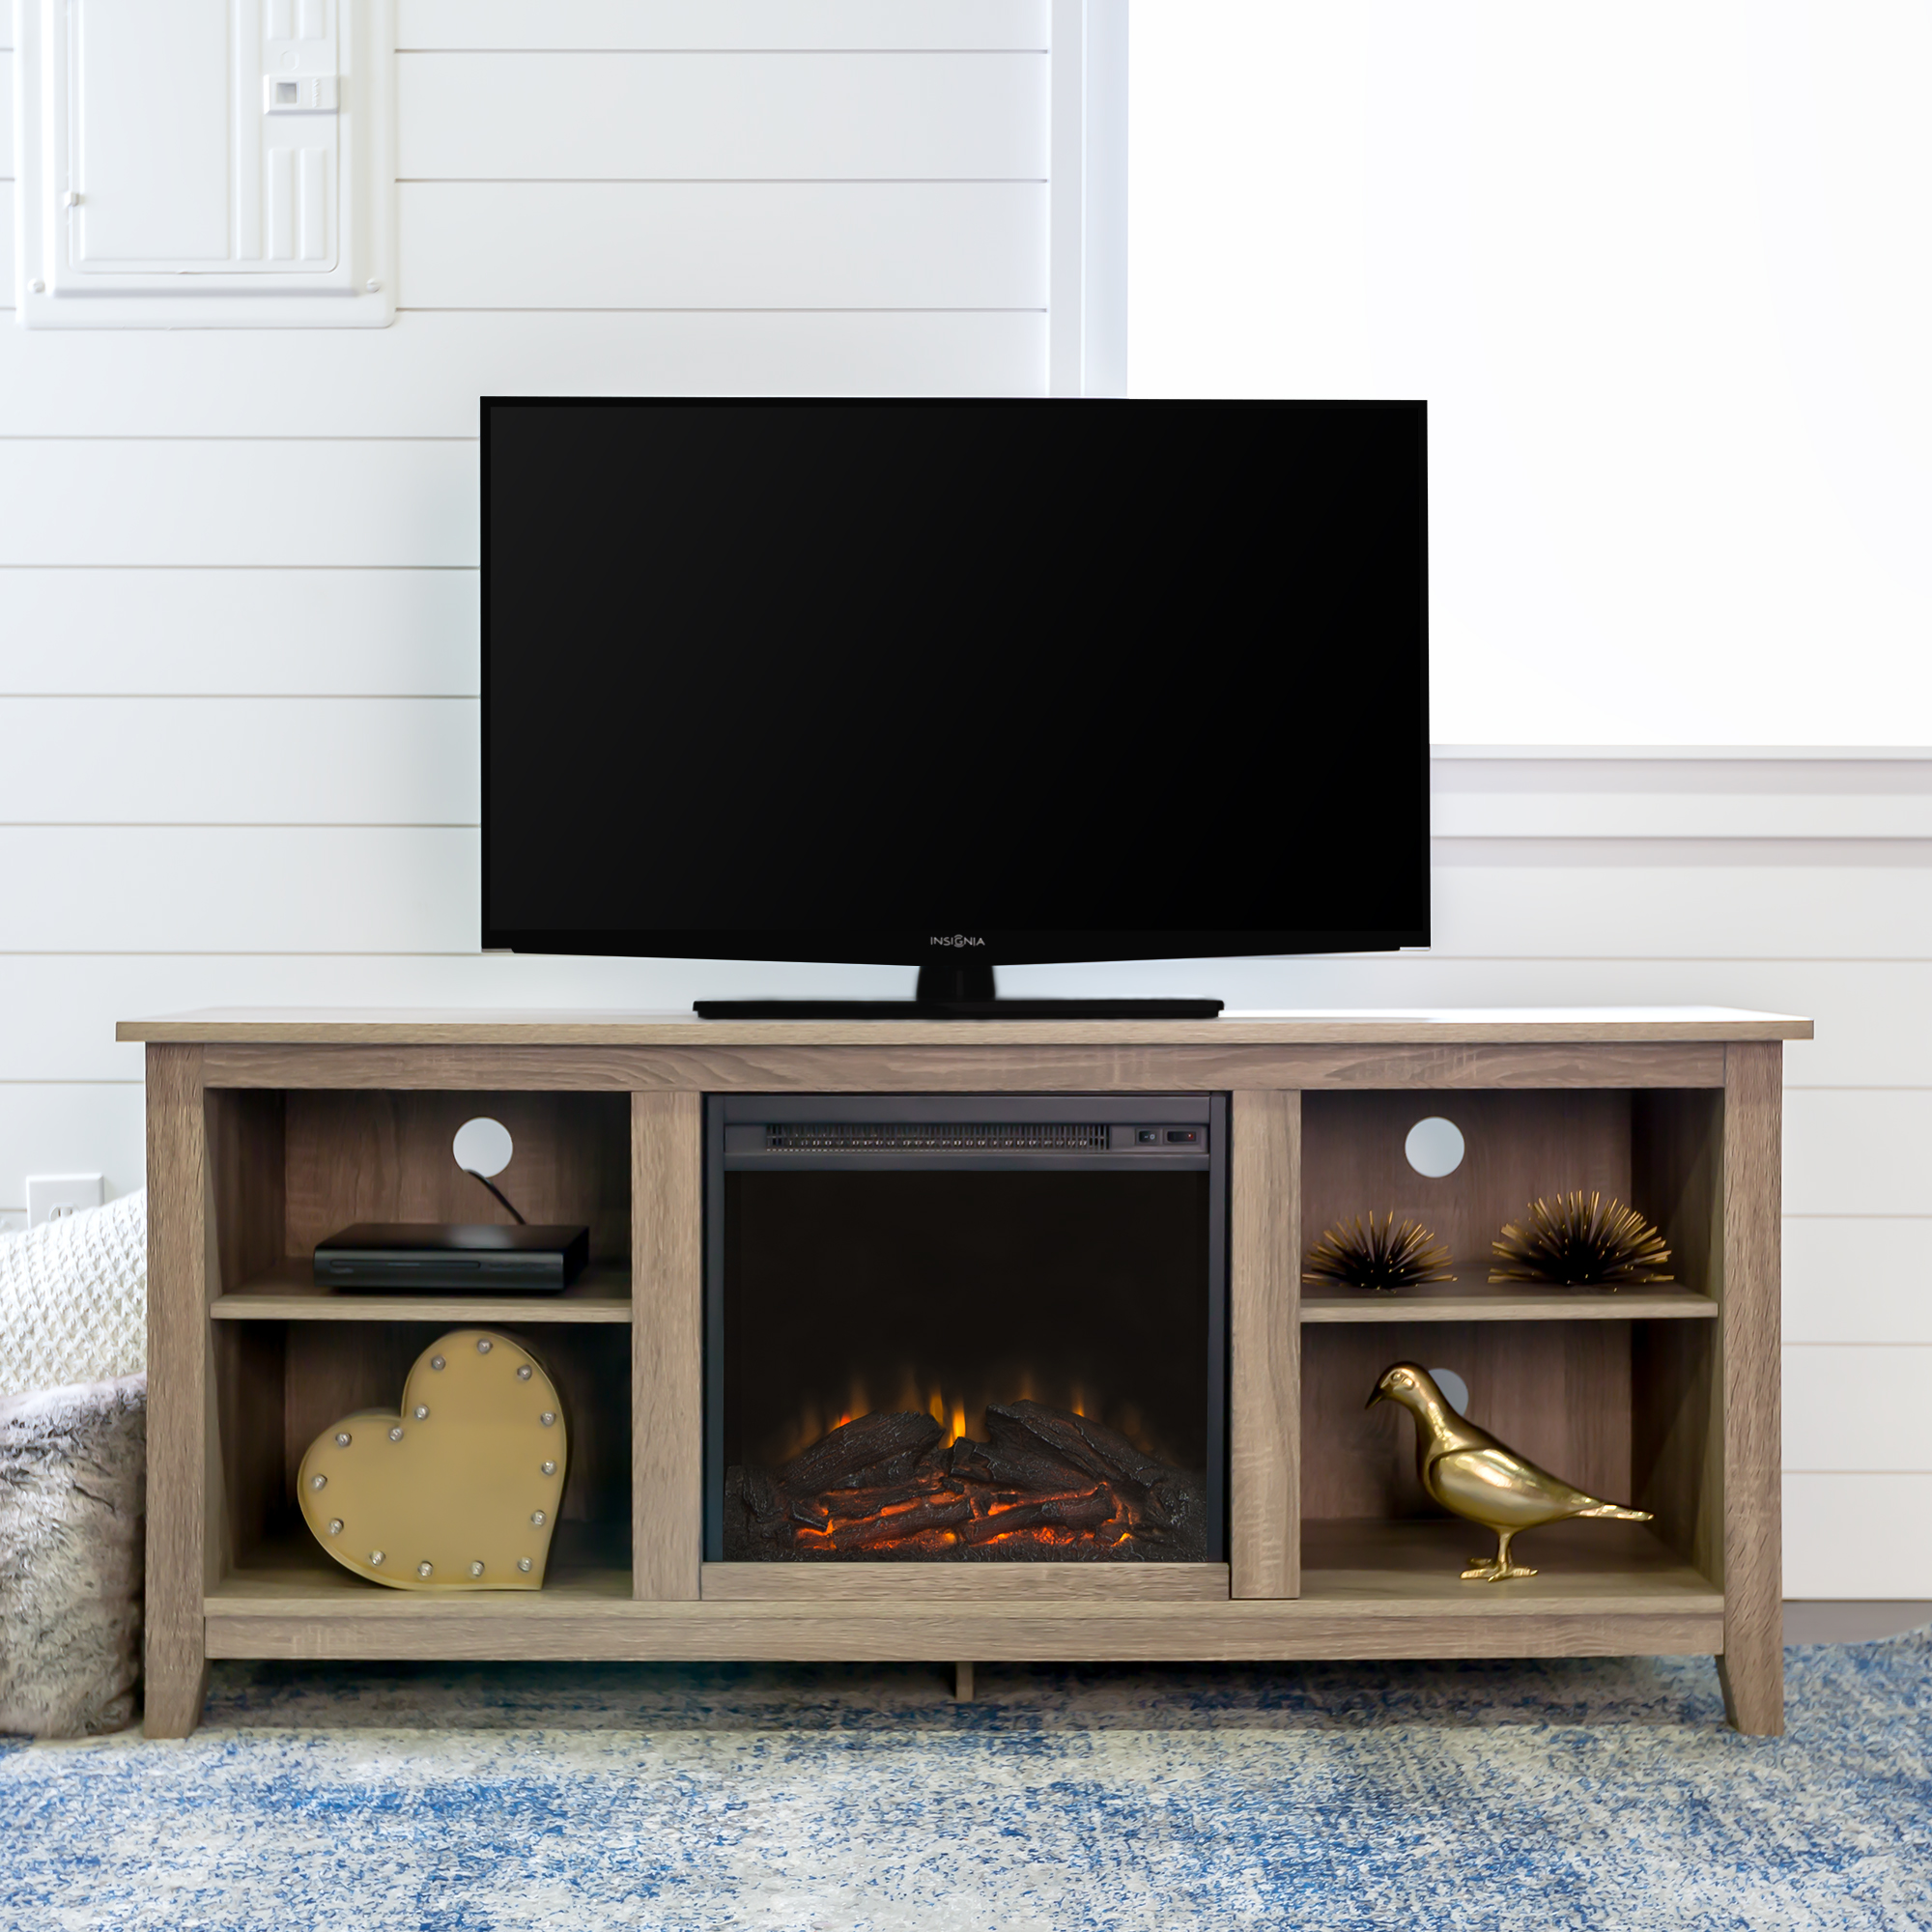 Walker Edison Traditional Fireplace TV Stand for TVs Up to 64", Driftwood - image 1 of 9